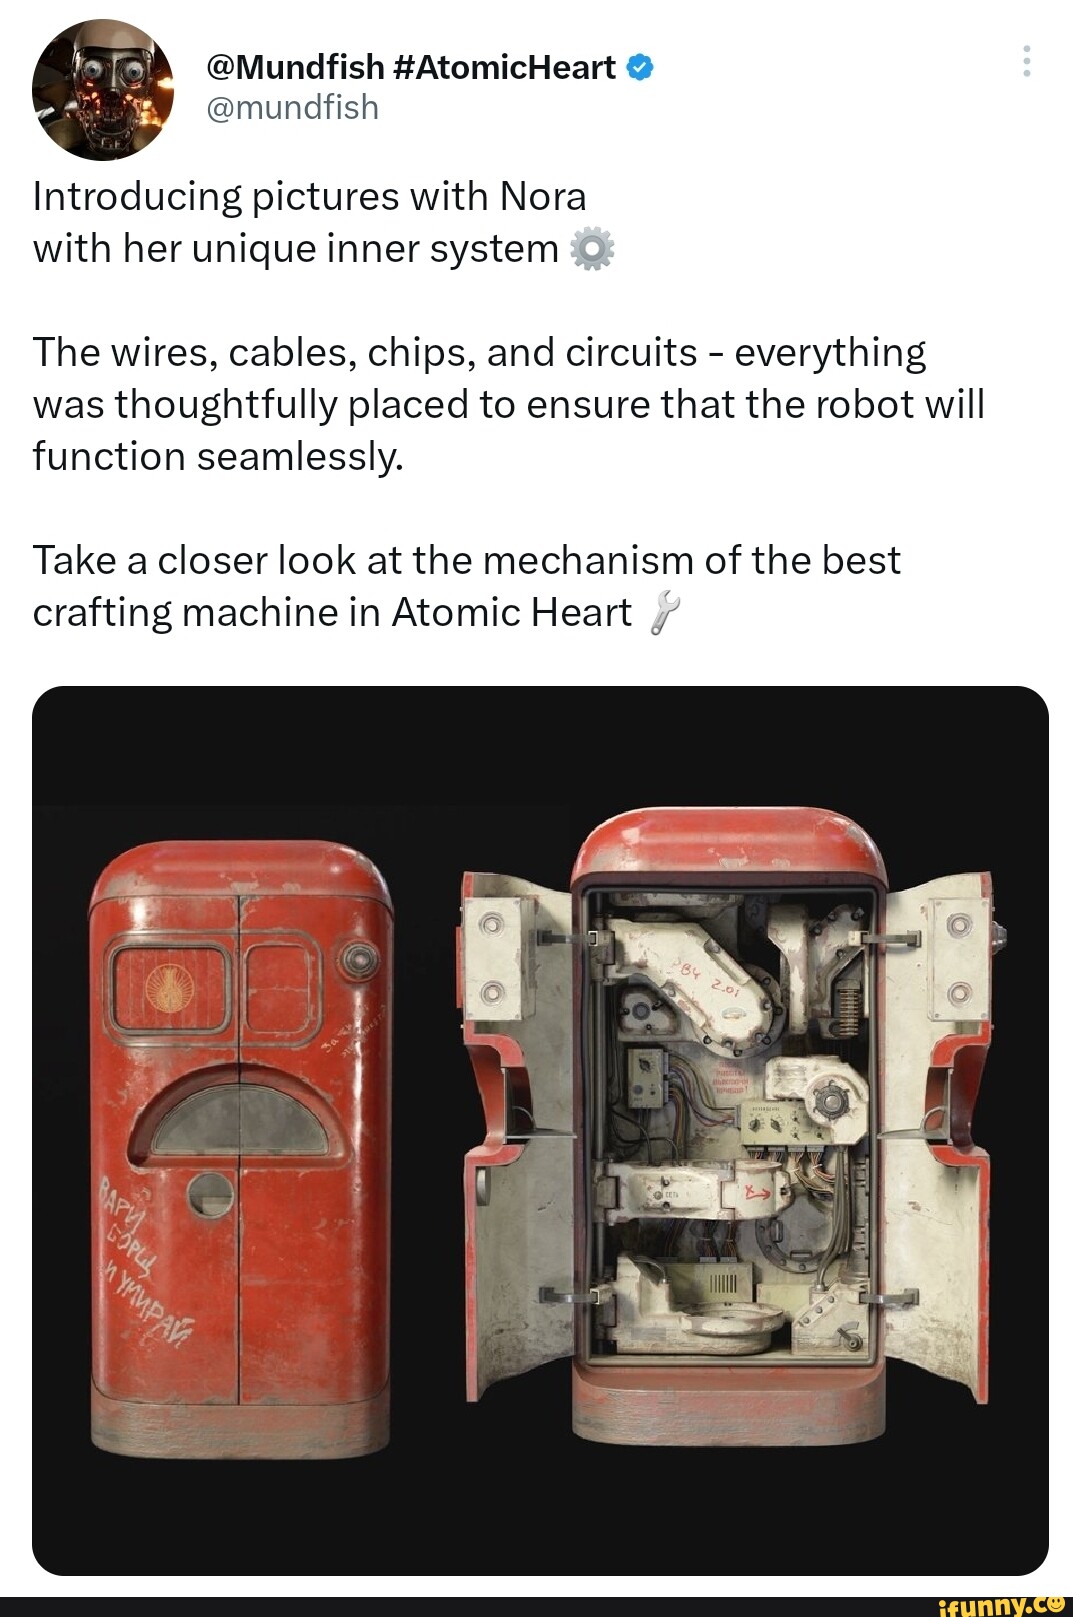 NORA the Horny Vending Machine Is Atomic Heart in a Nutshell